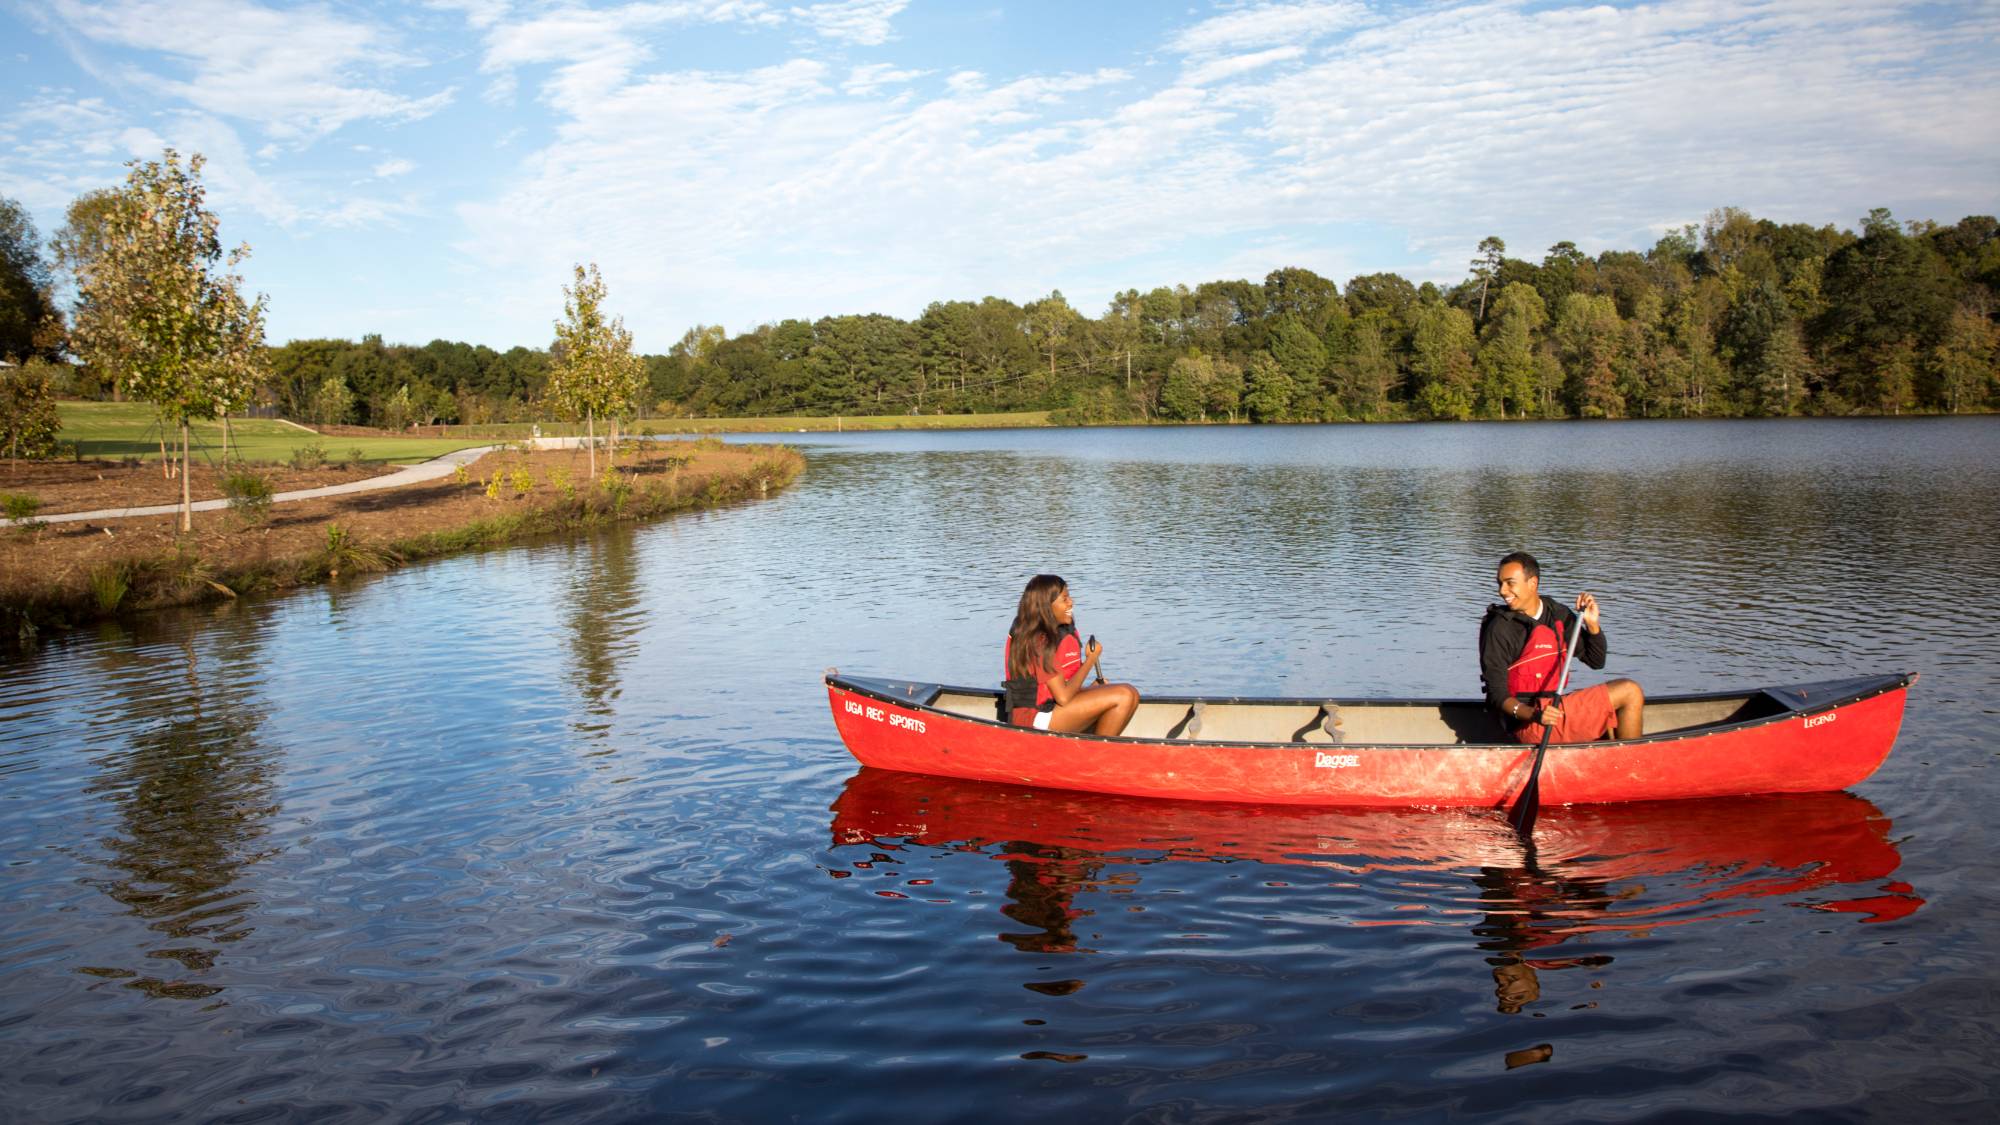 Two people smile at each other while paddling a canoe on a lake under a partly cloudy blue sky